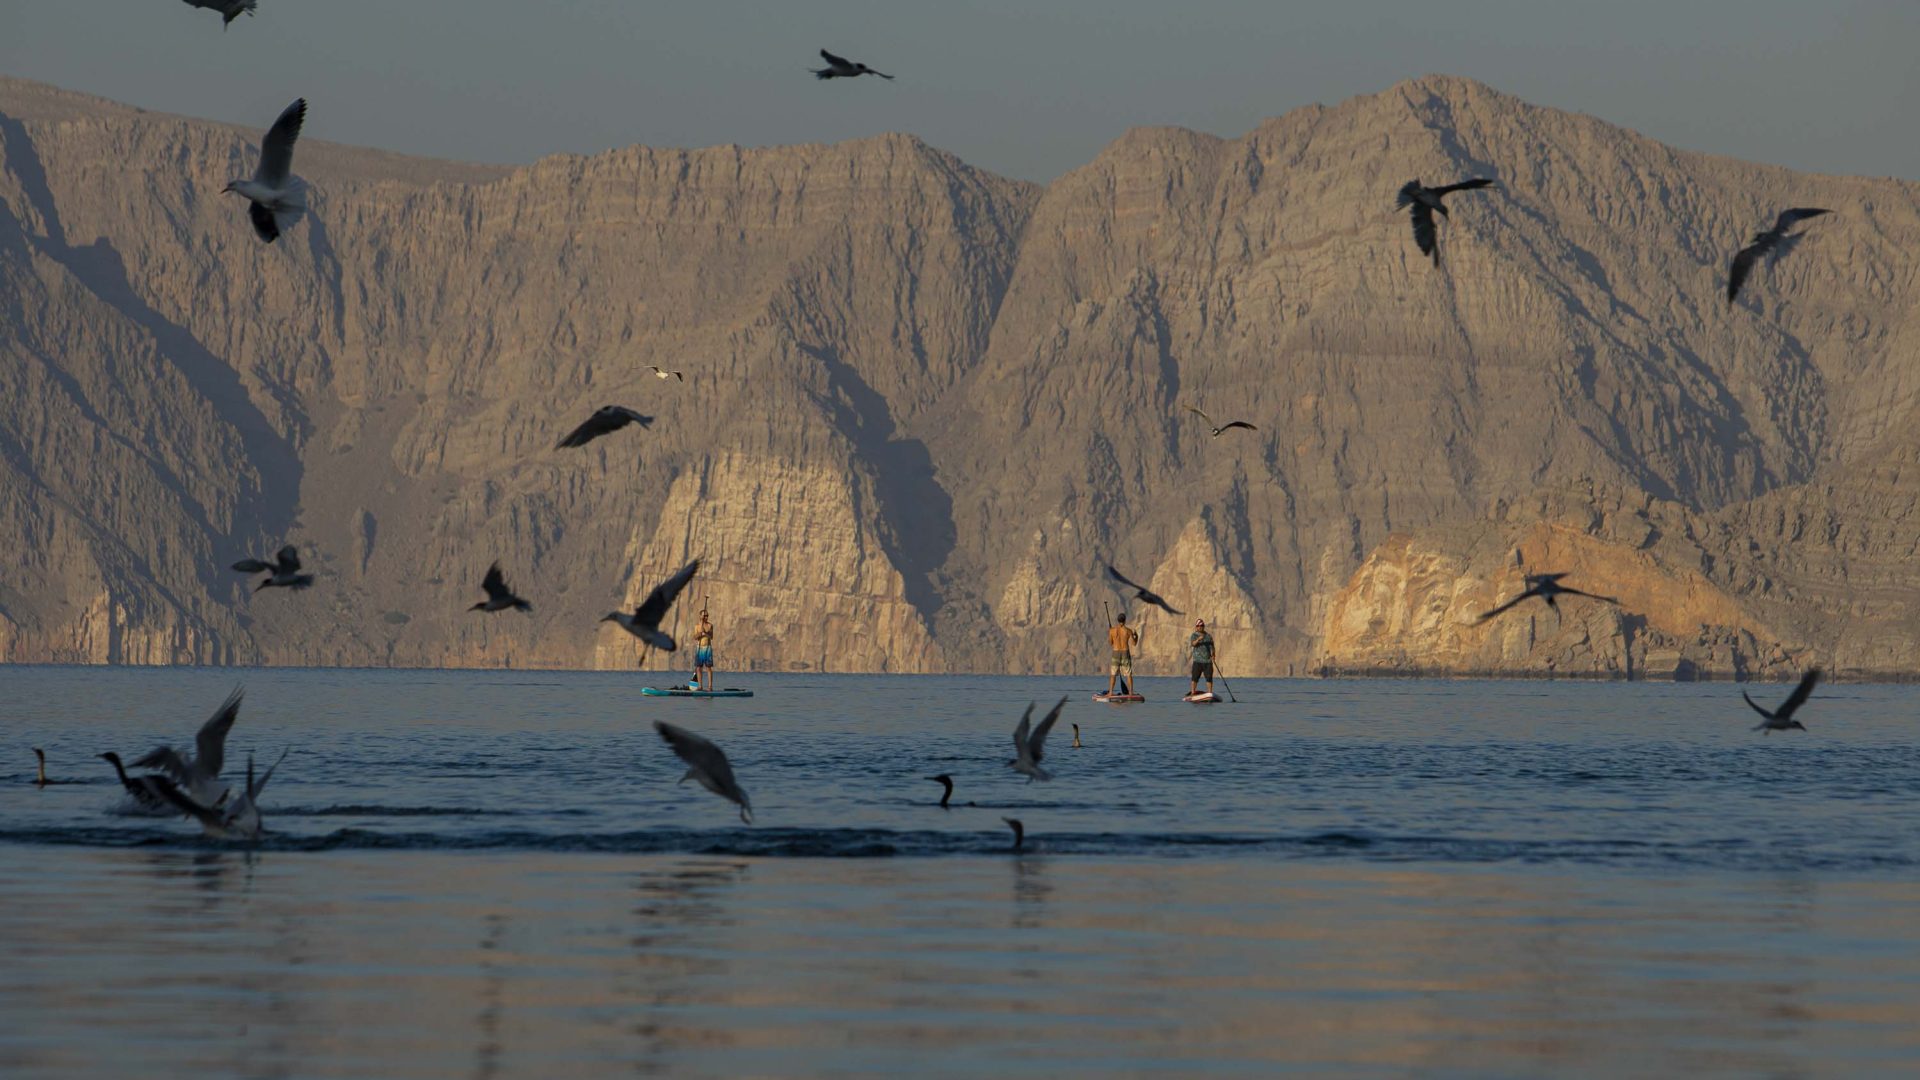 Birds fly in the air above some paddle boarders